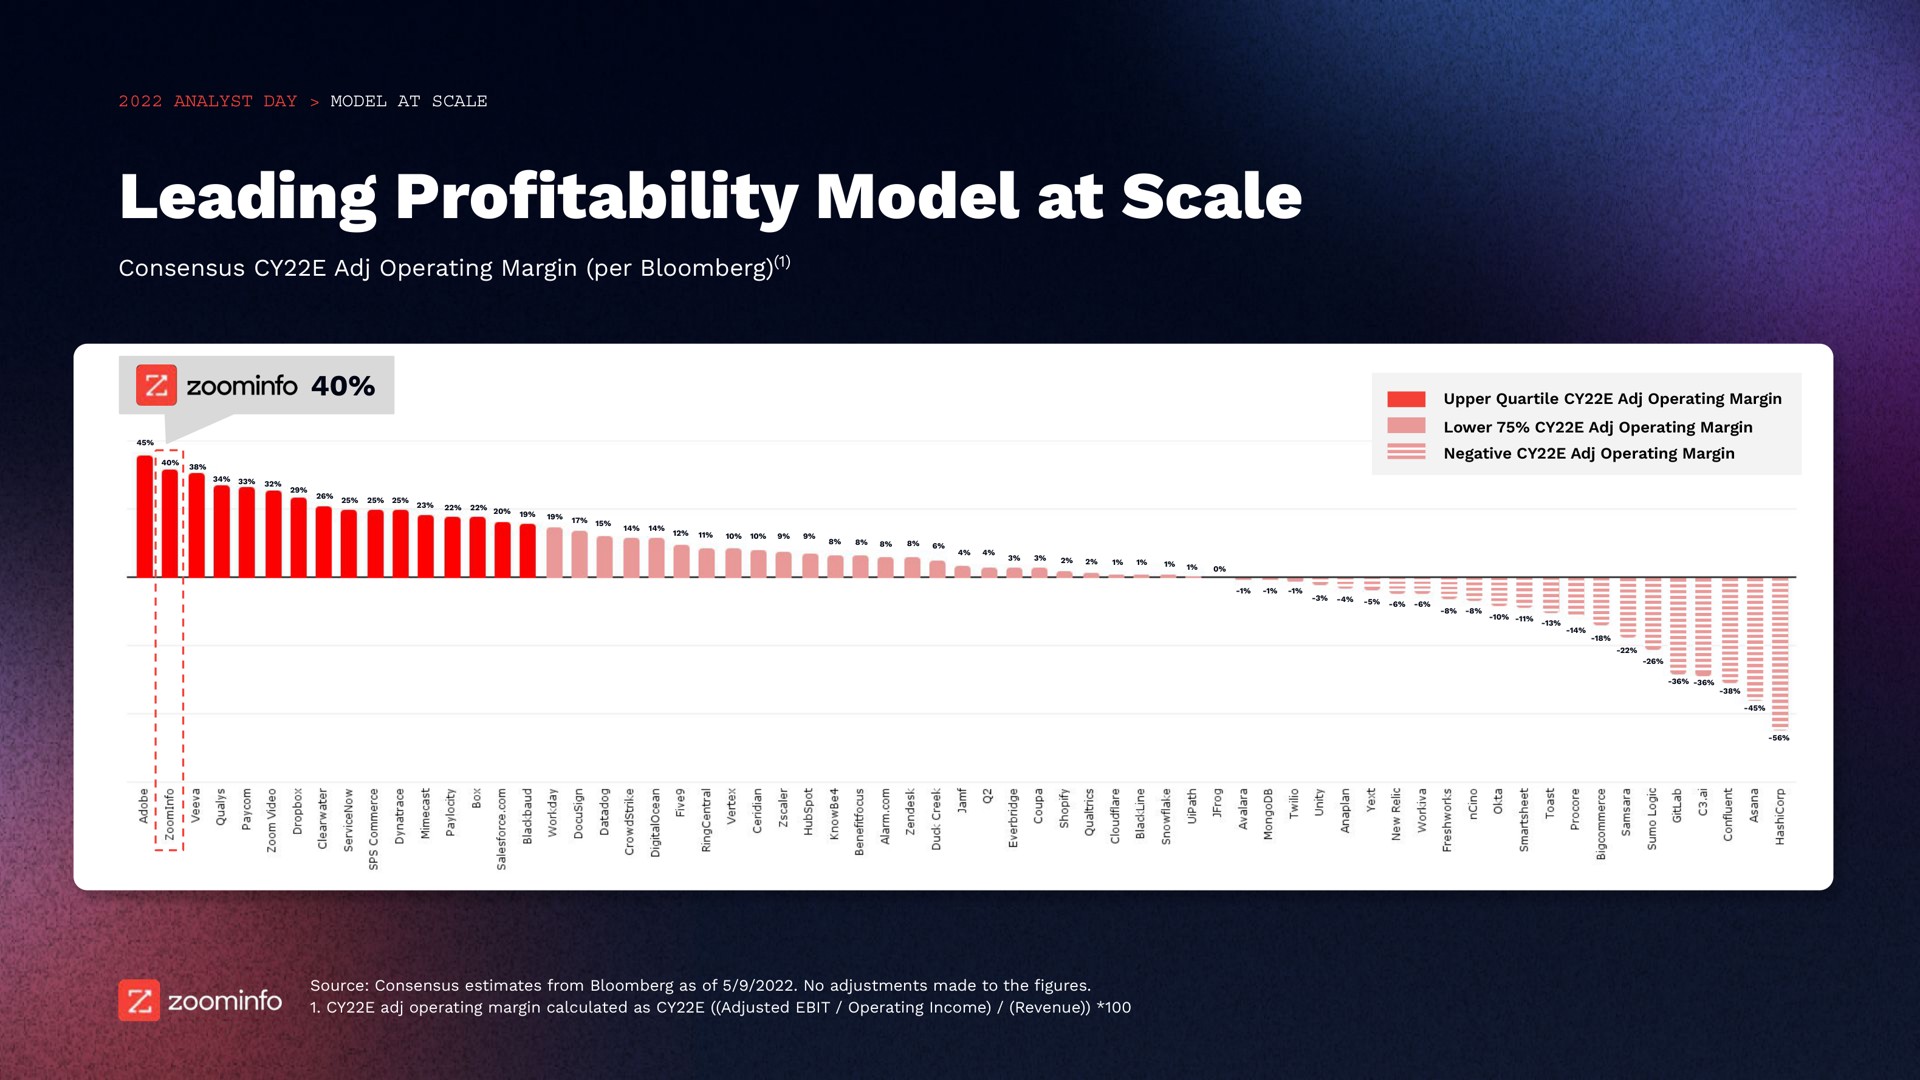 leading pro model at scale edit gid workday and up should be the upper quartile color profitability | Zoominfo